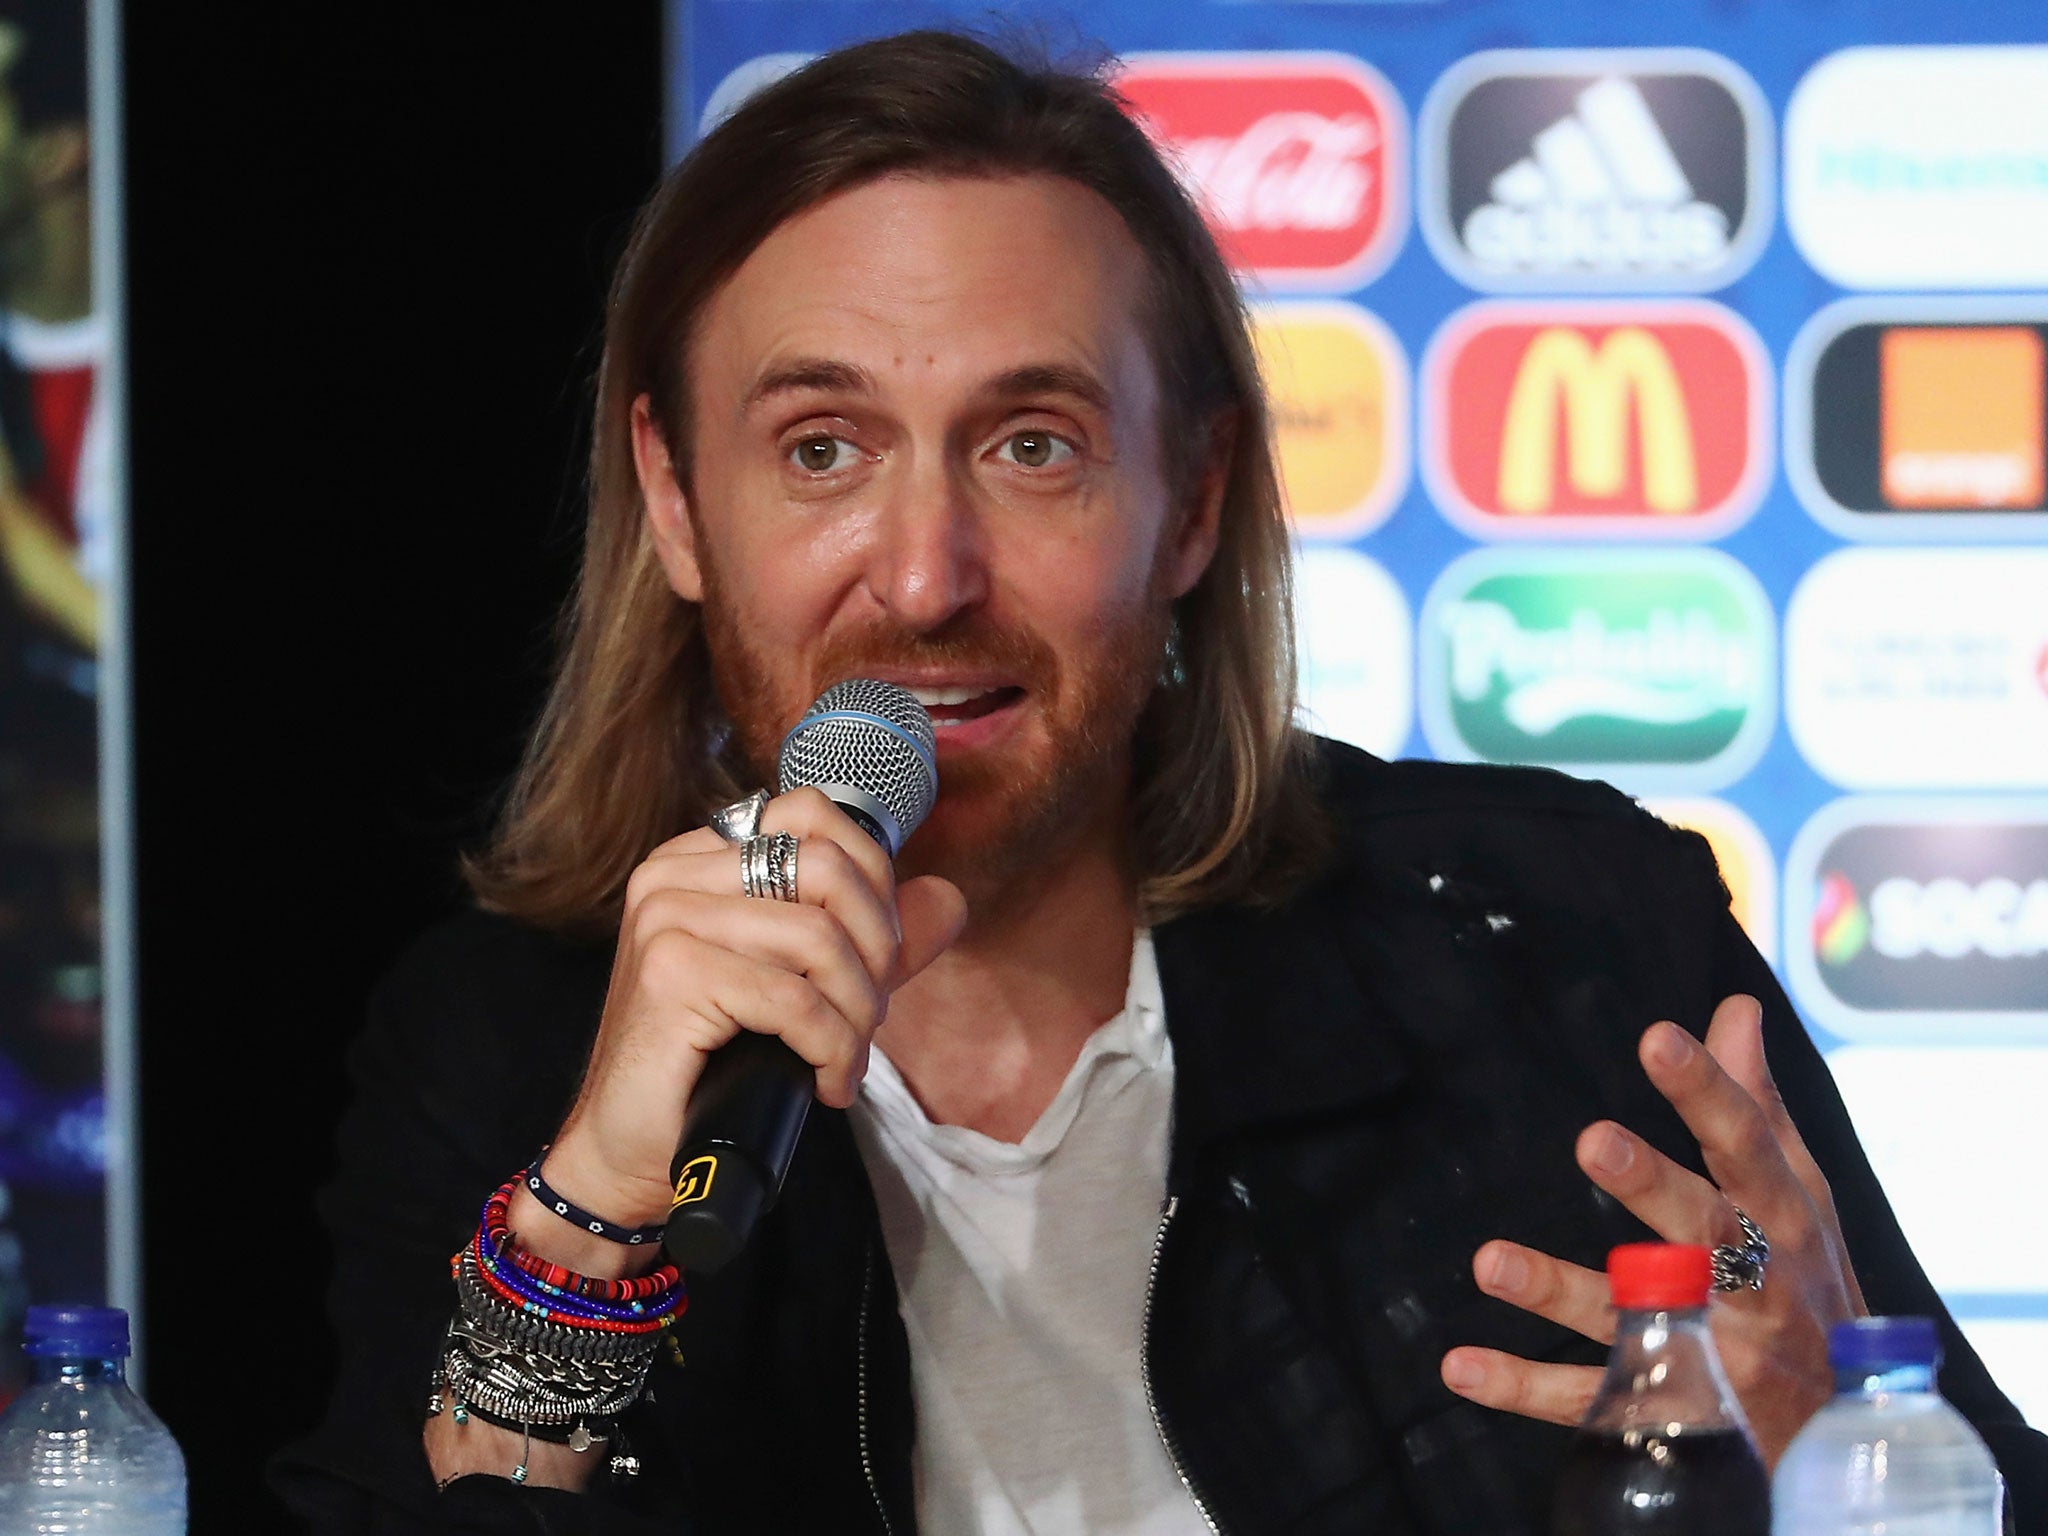 David Guetta will perform in the opening ceremony